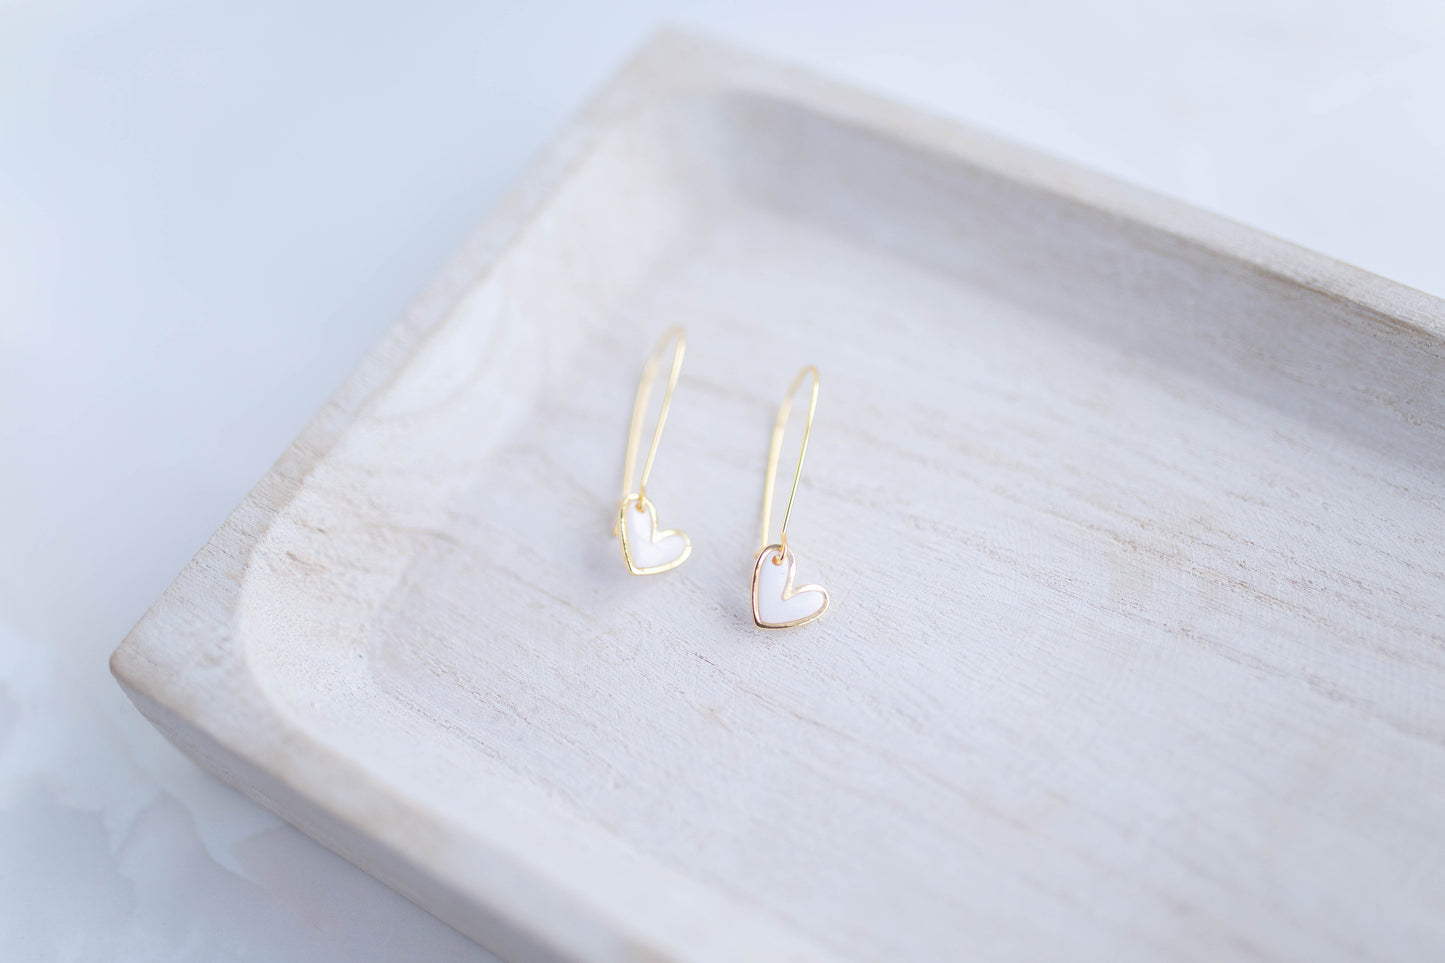 Clay Earrings | Mini Heart Drops | Lover Era Collection